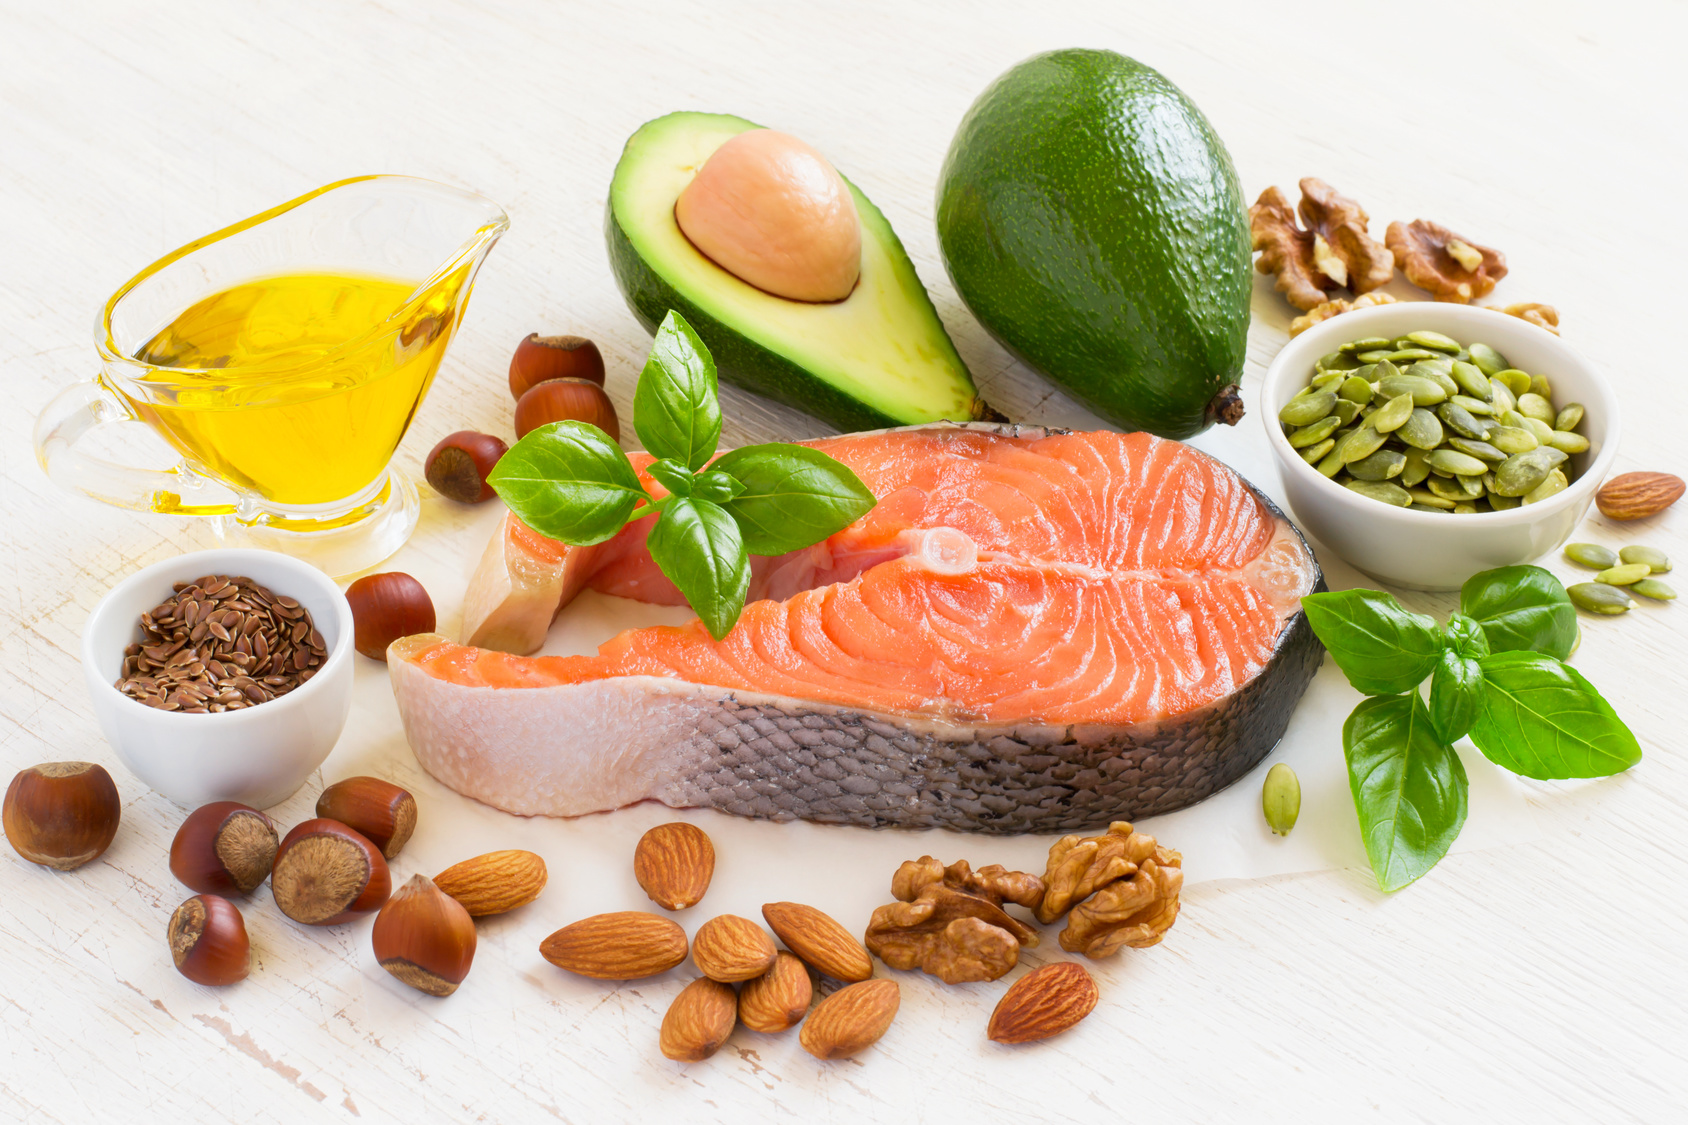 Set of food with high content of healthy fats and omega 3